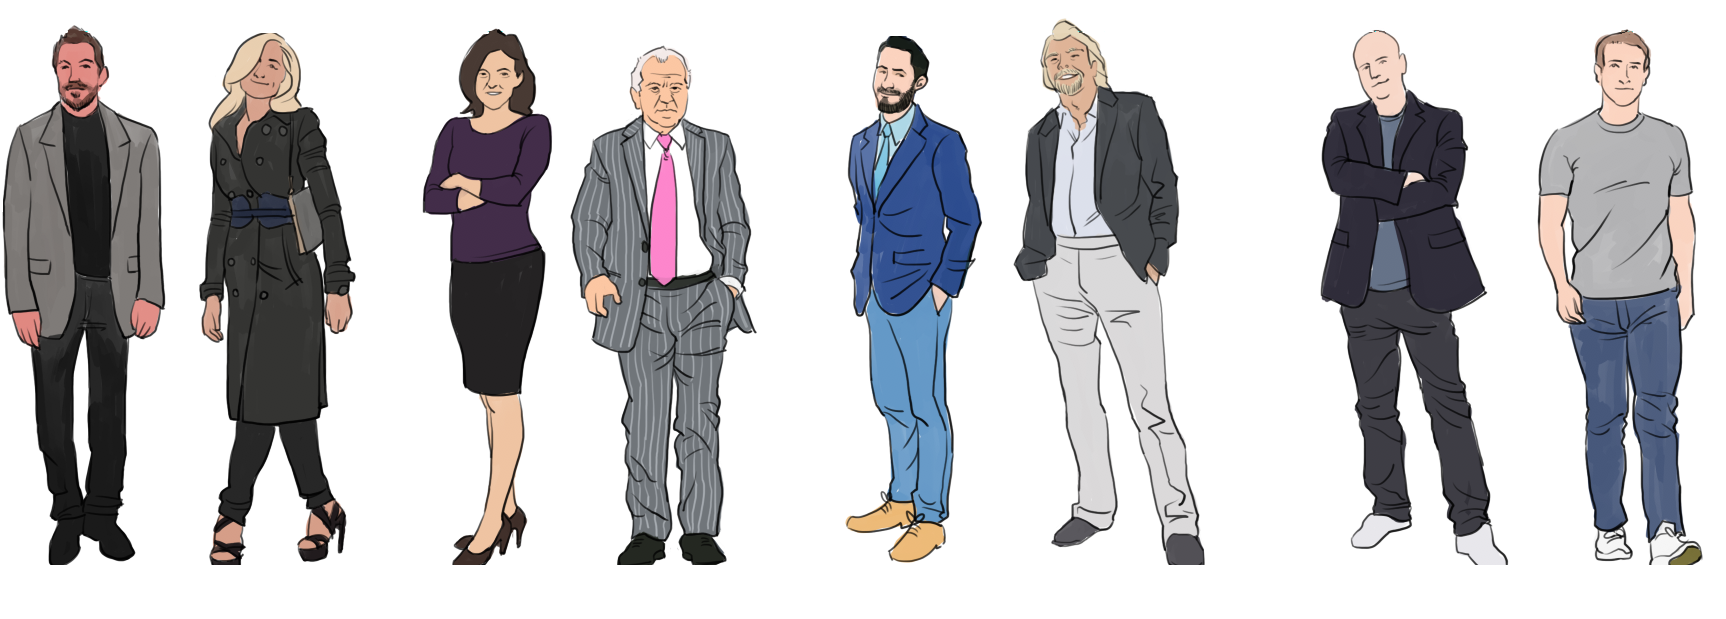 A Guide To Workplace Dress Codes